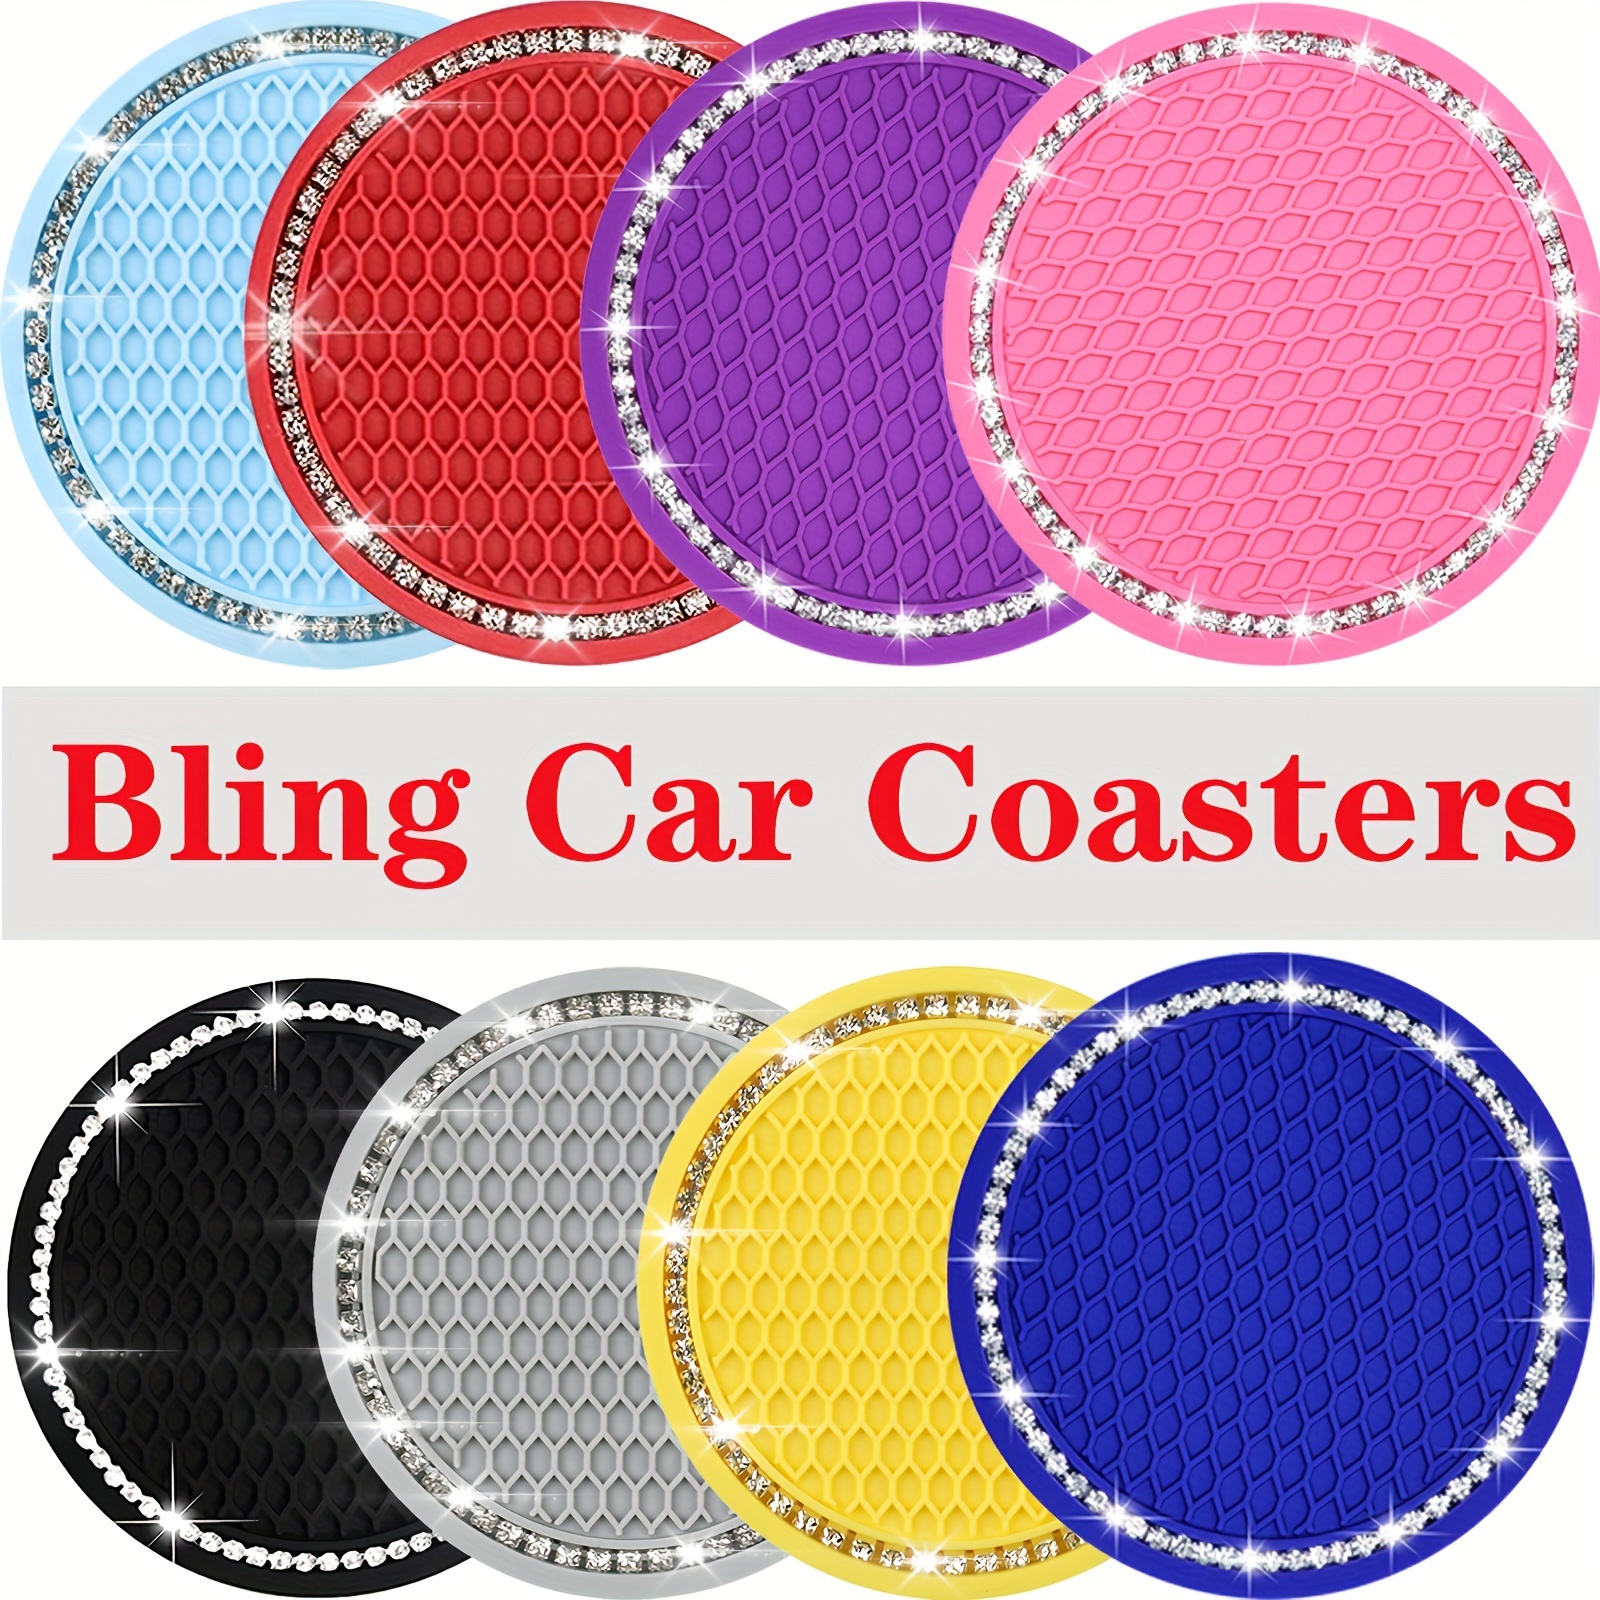 2pcs Bling Car Coasters for Cup Holder,Universal Vehicle Cup